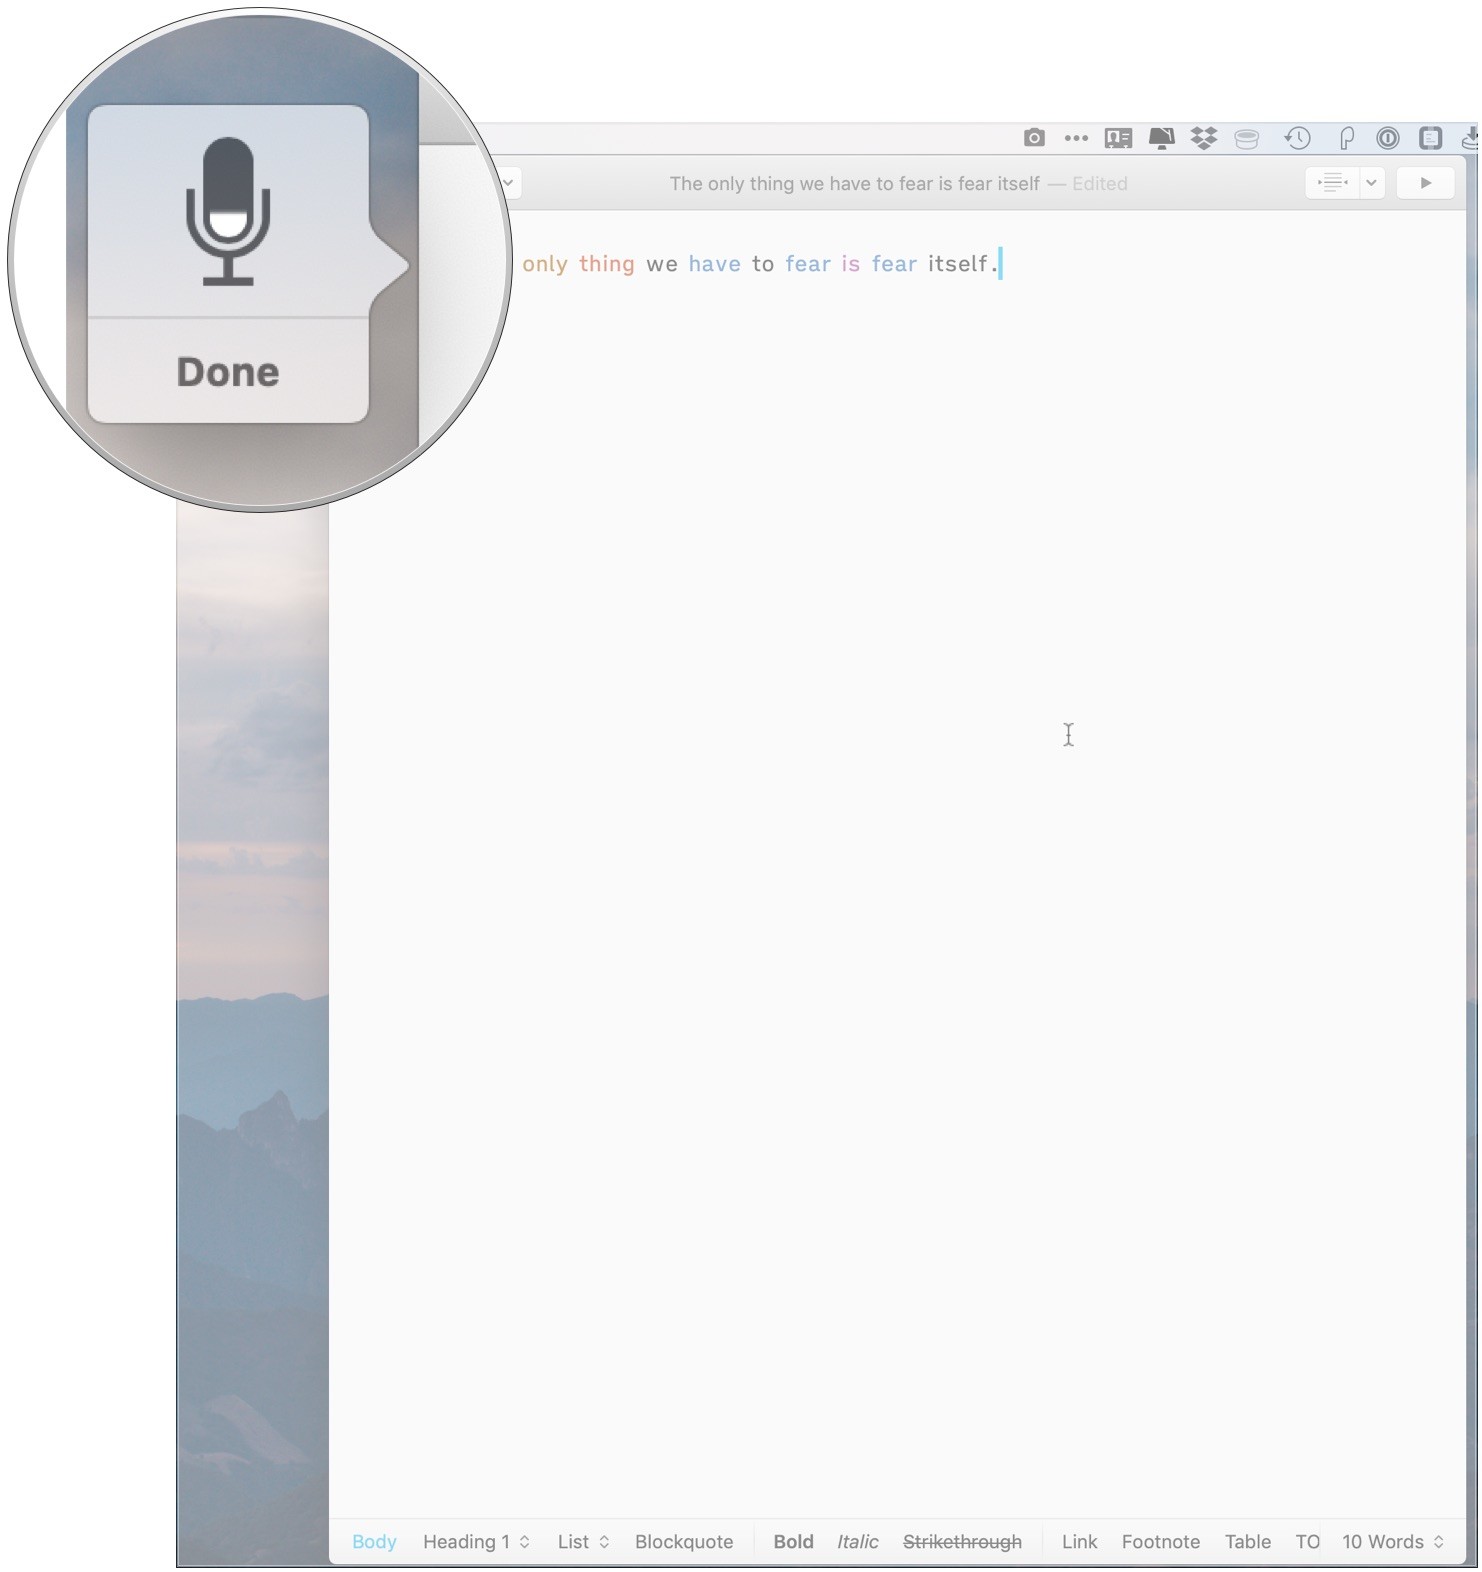 Dictation And Speech Mac Download